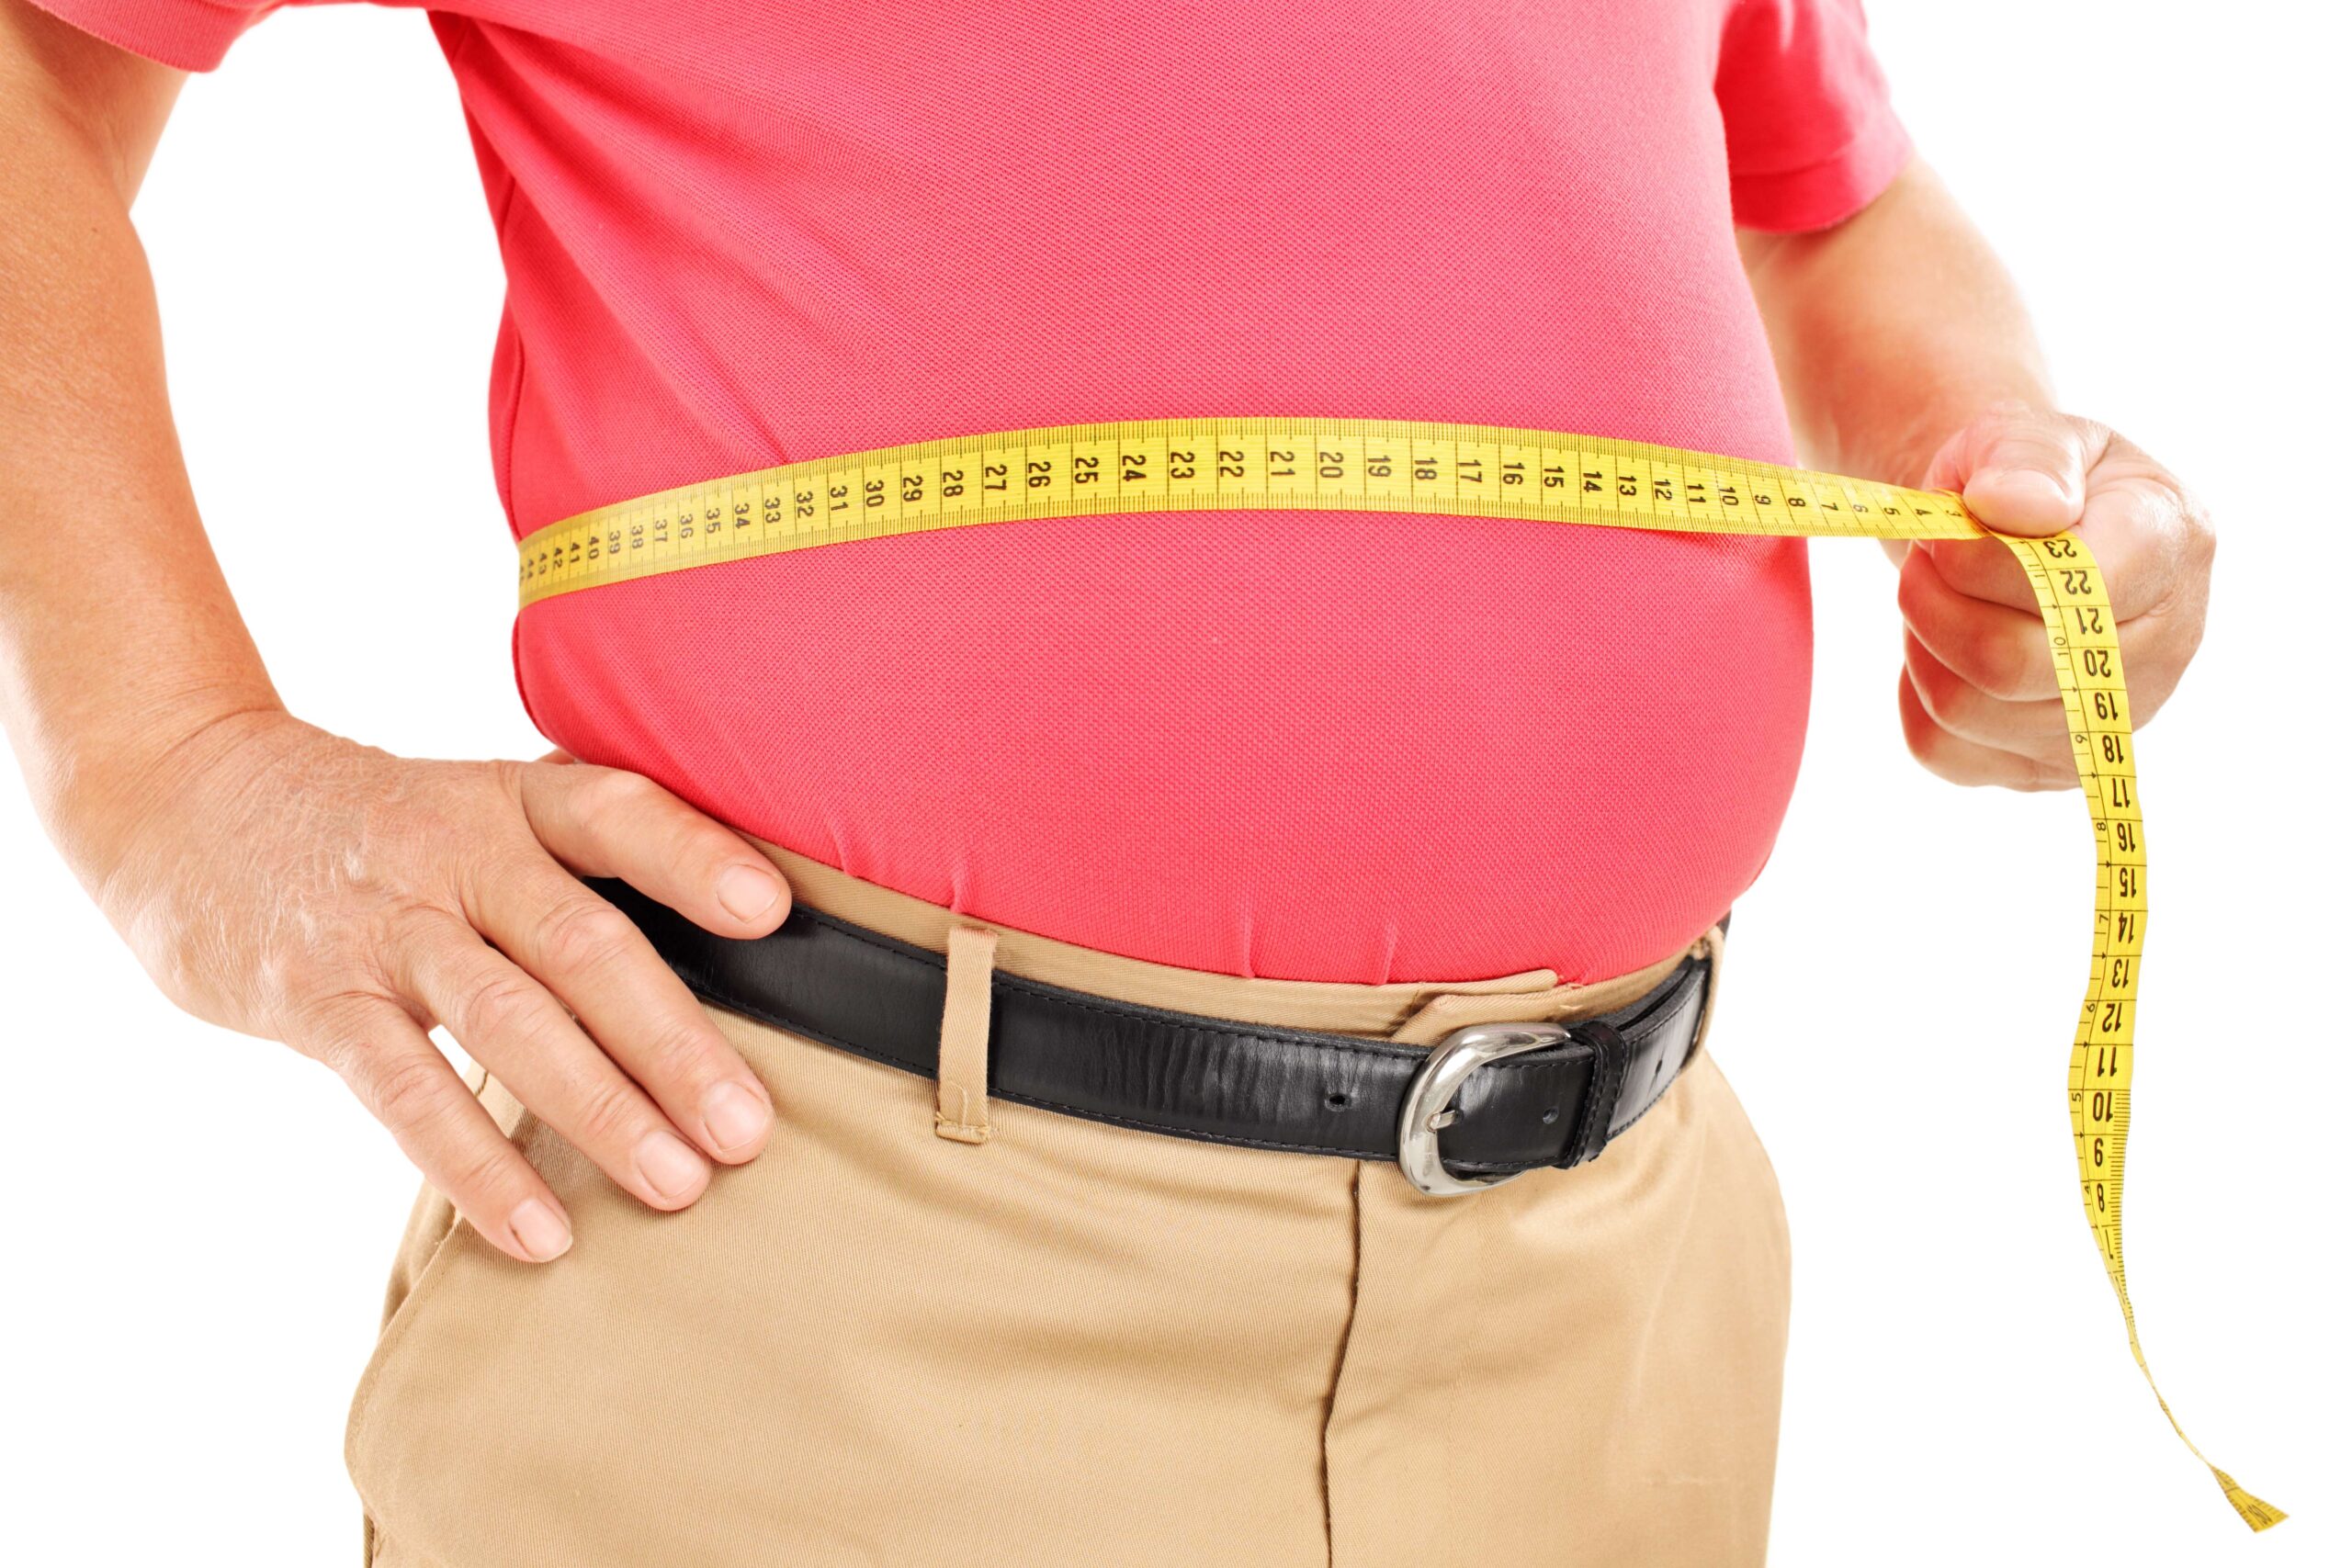 What is considered sudden weight loss